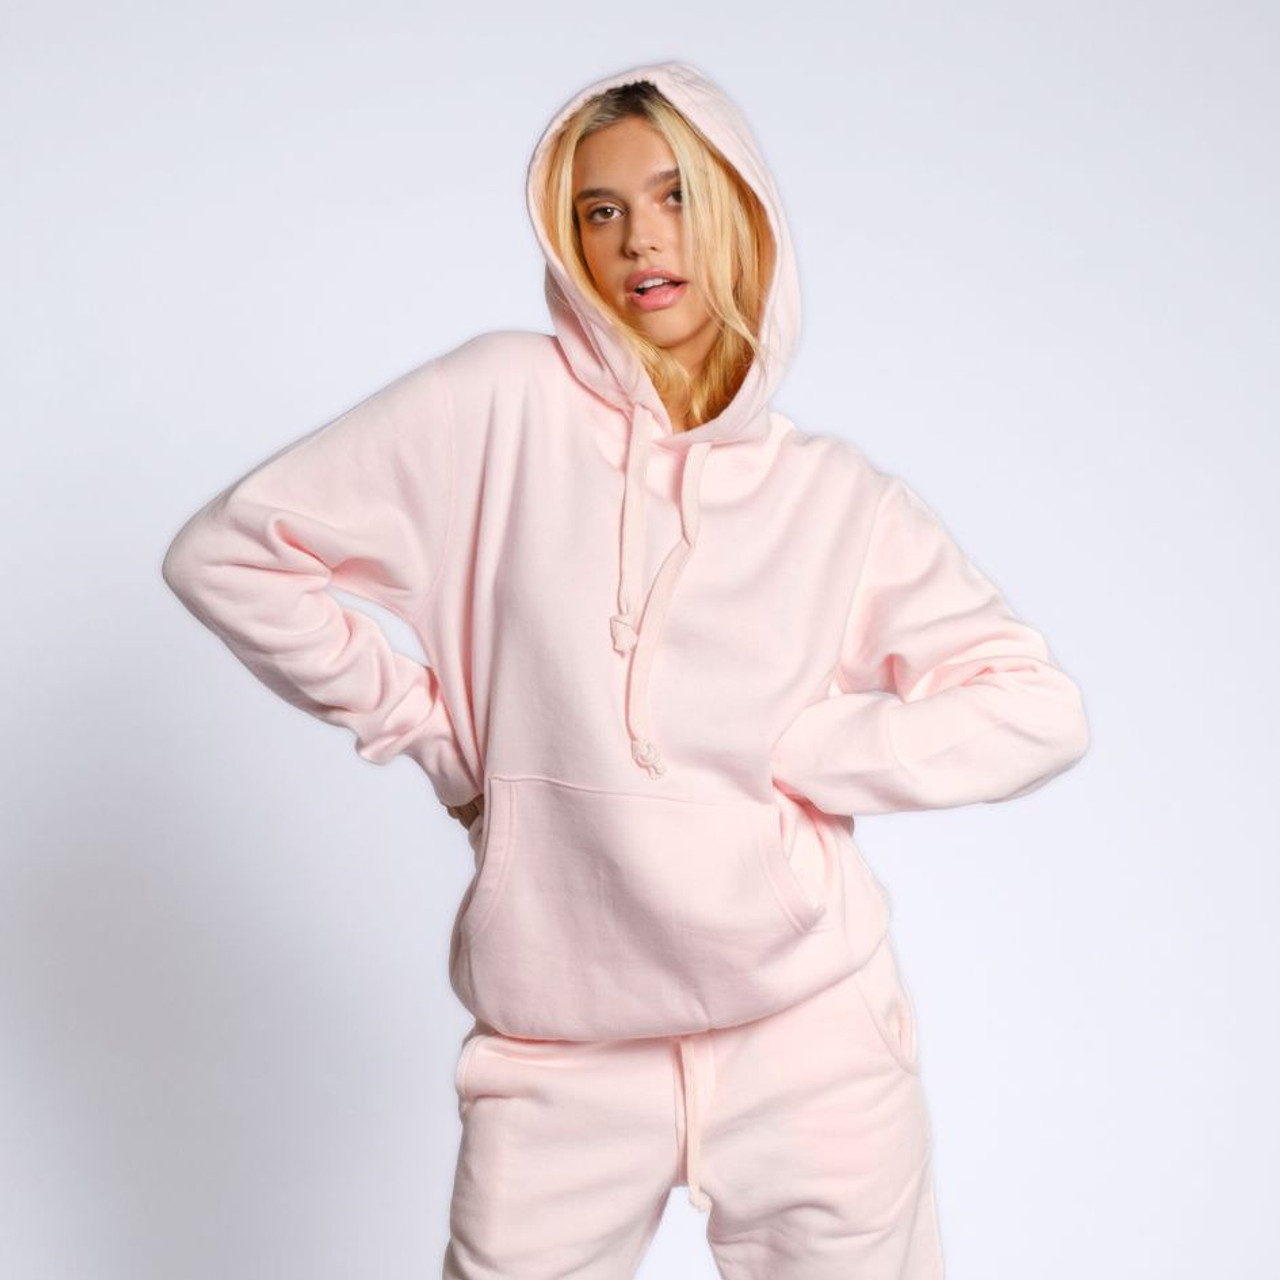 Buy Pink Sweatshirts & Hoodie for Girls by Poppers by Pantaloons Online